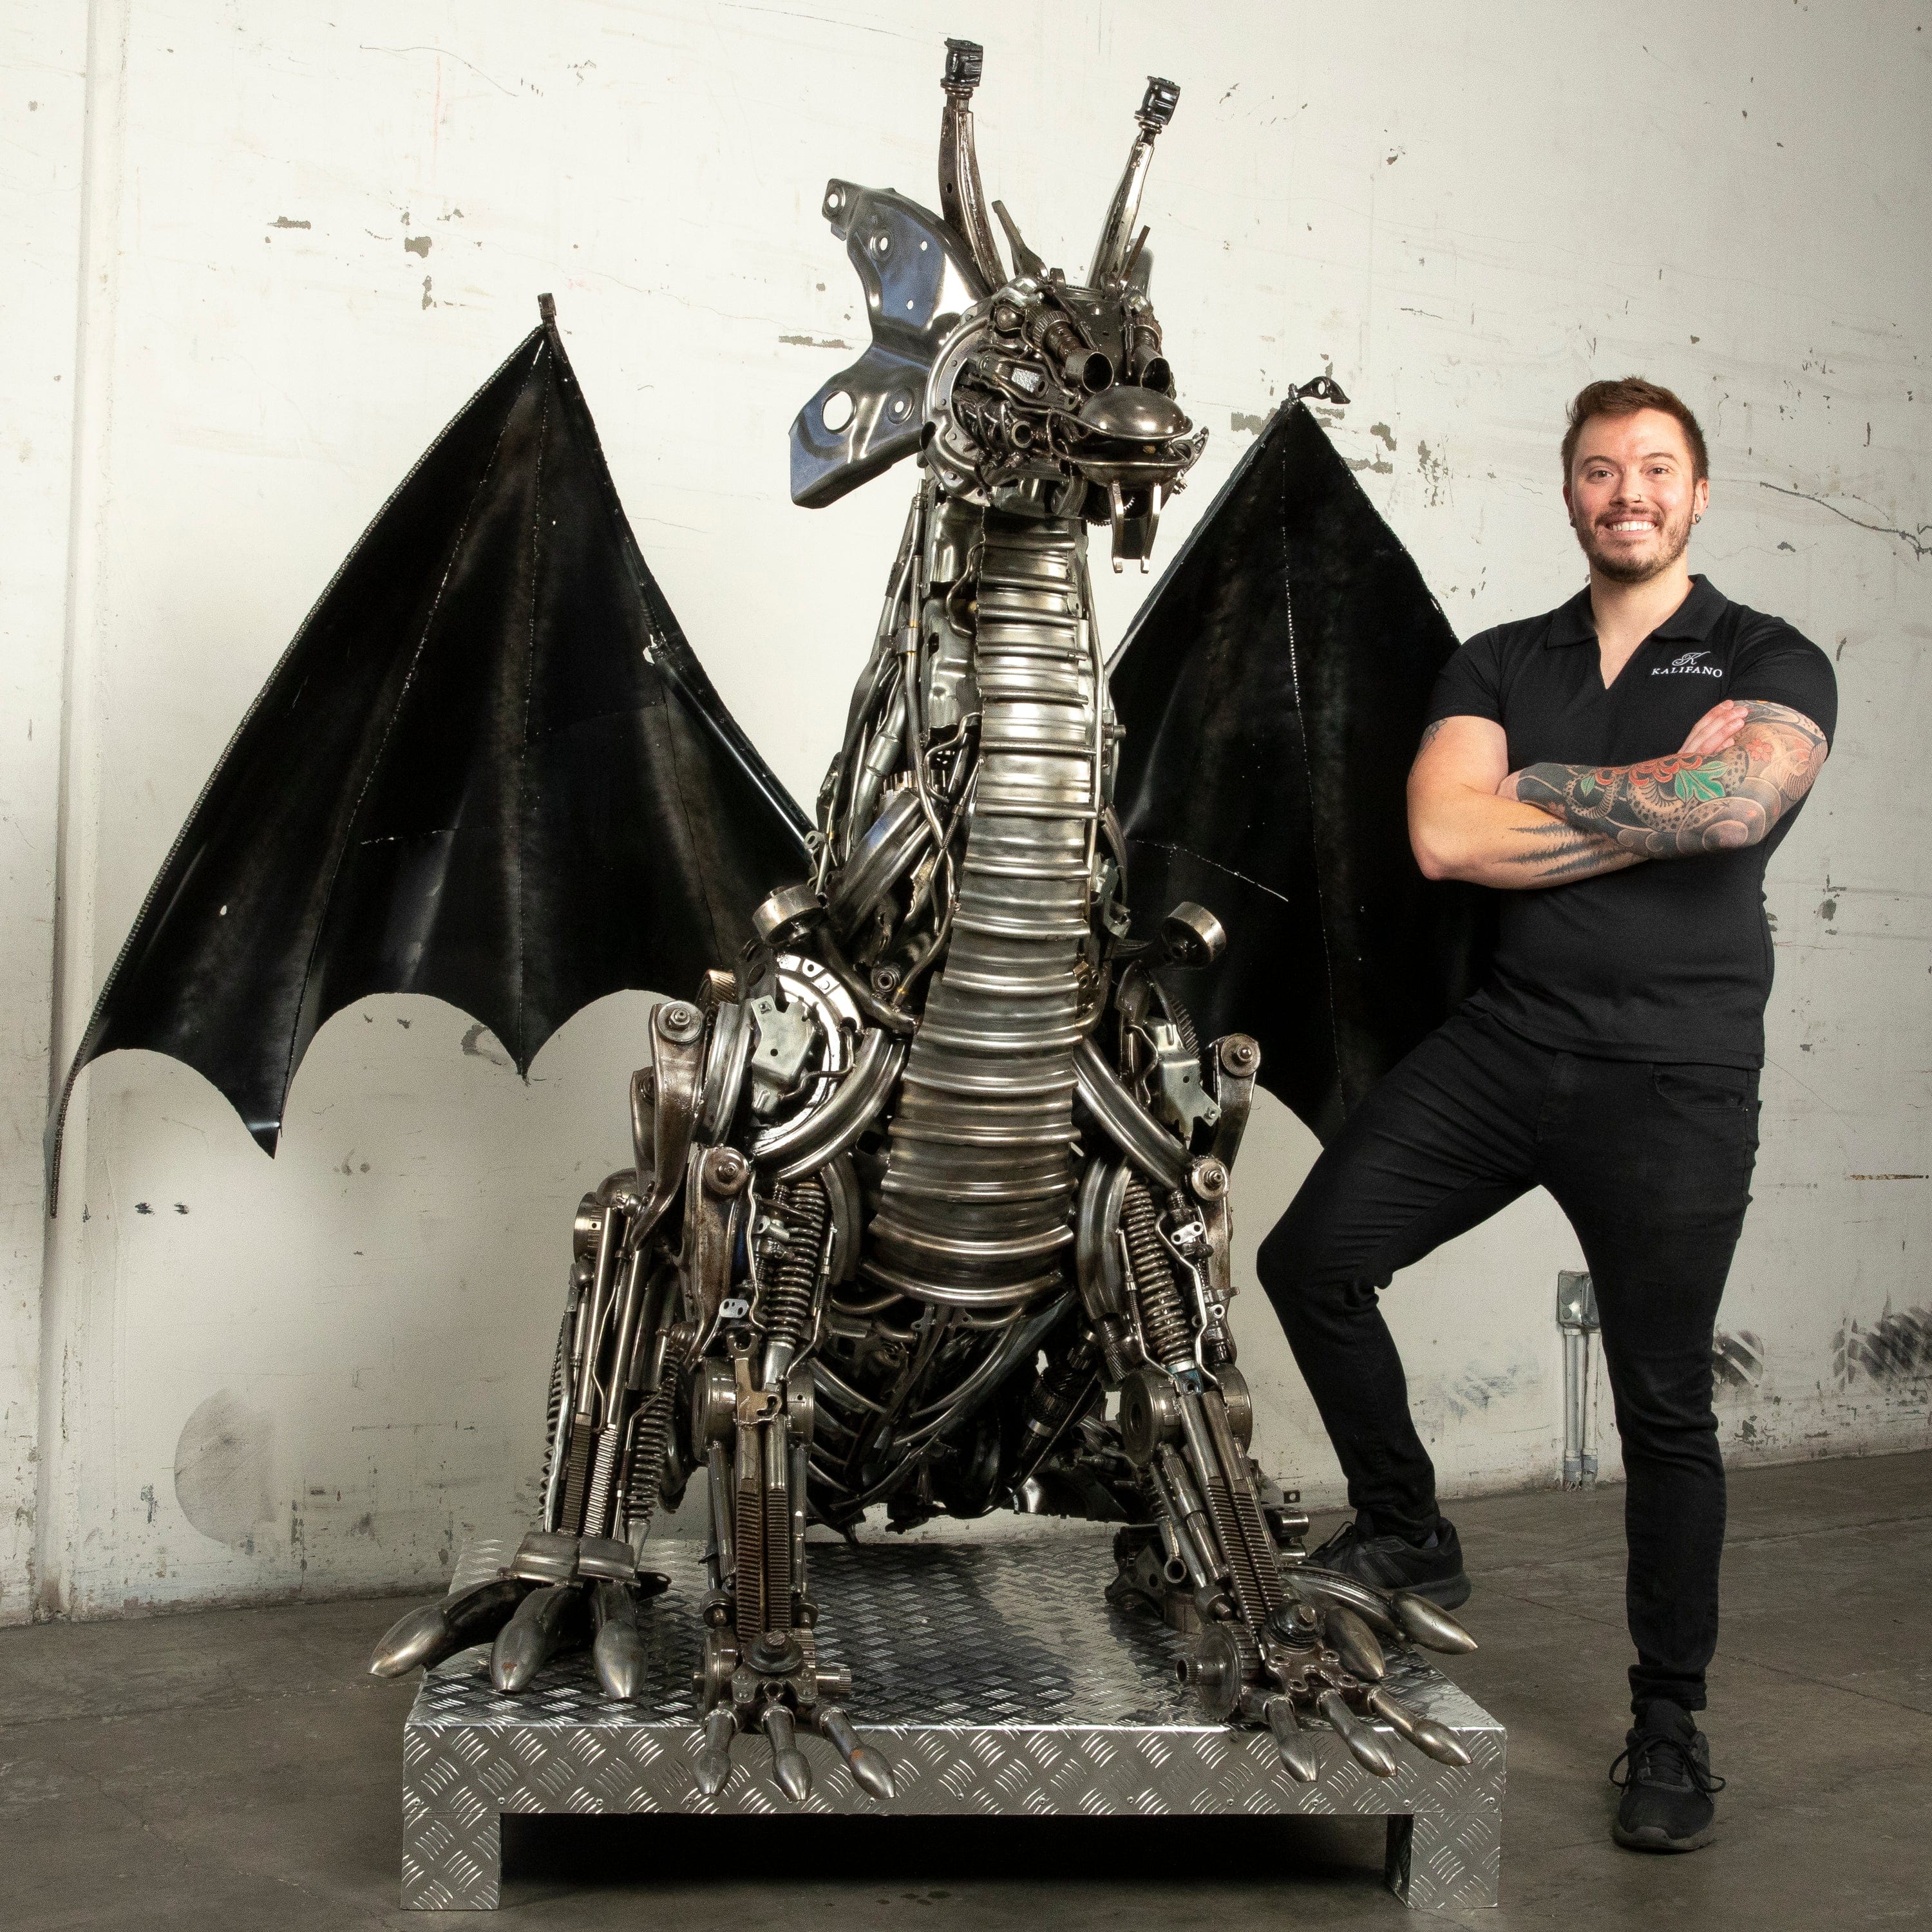 KALIFANO Recycled Metal Art 67” Dragon Inspired Recycled Metal Art Sculpture RMS-DRAG170-S02